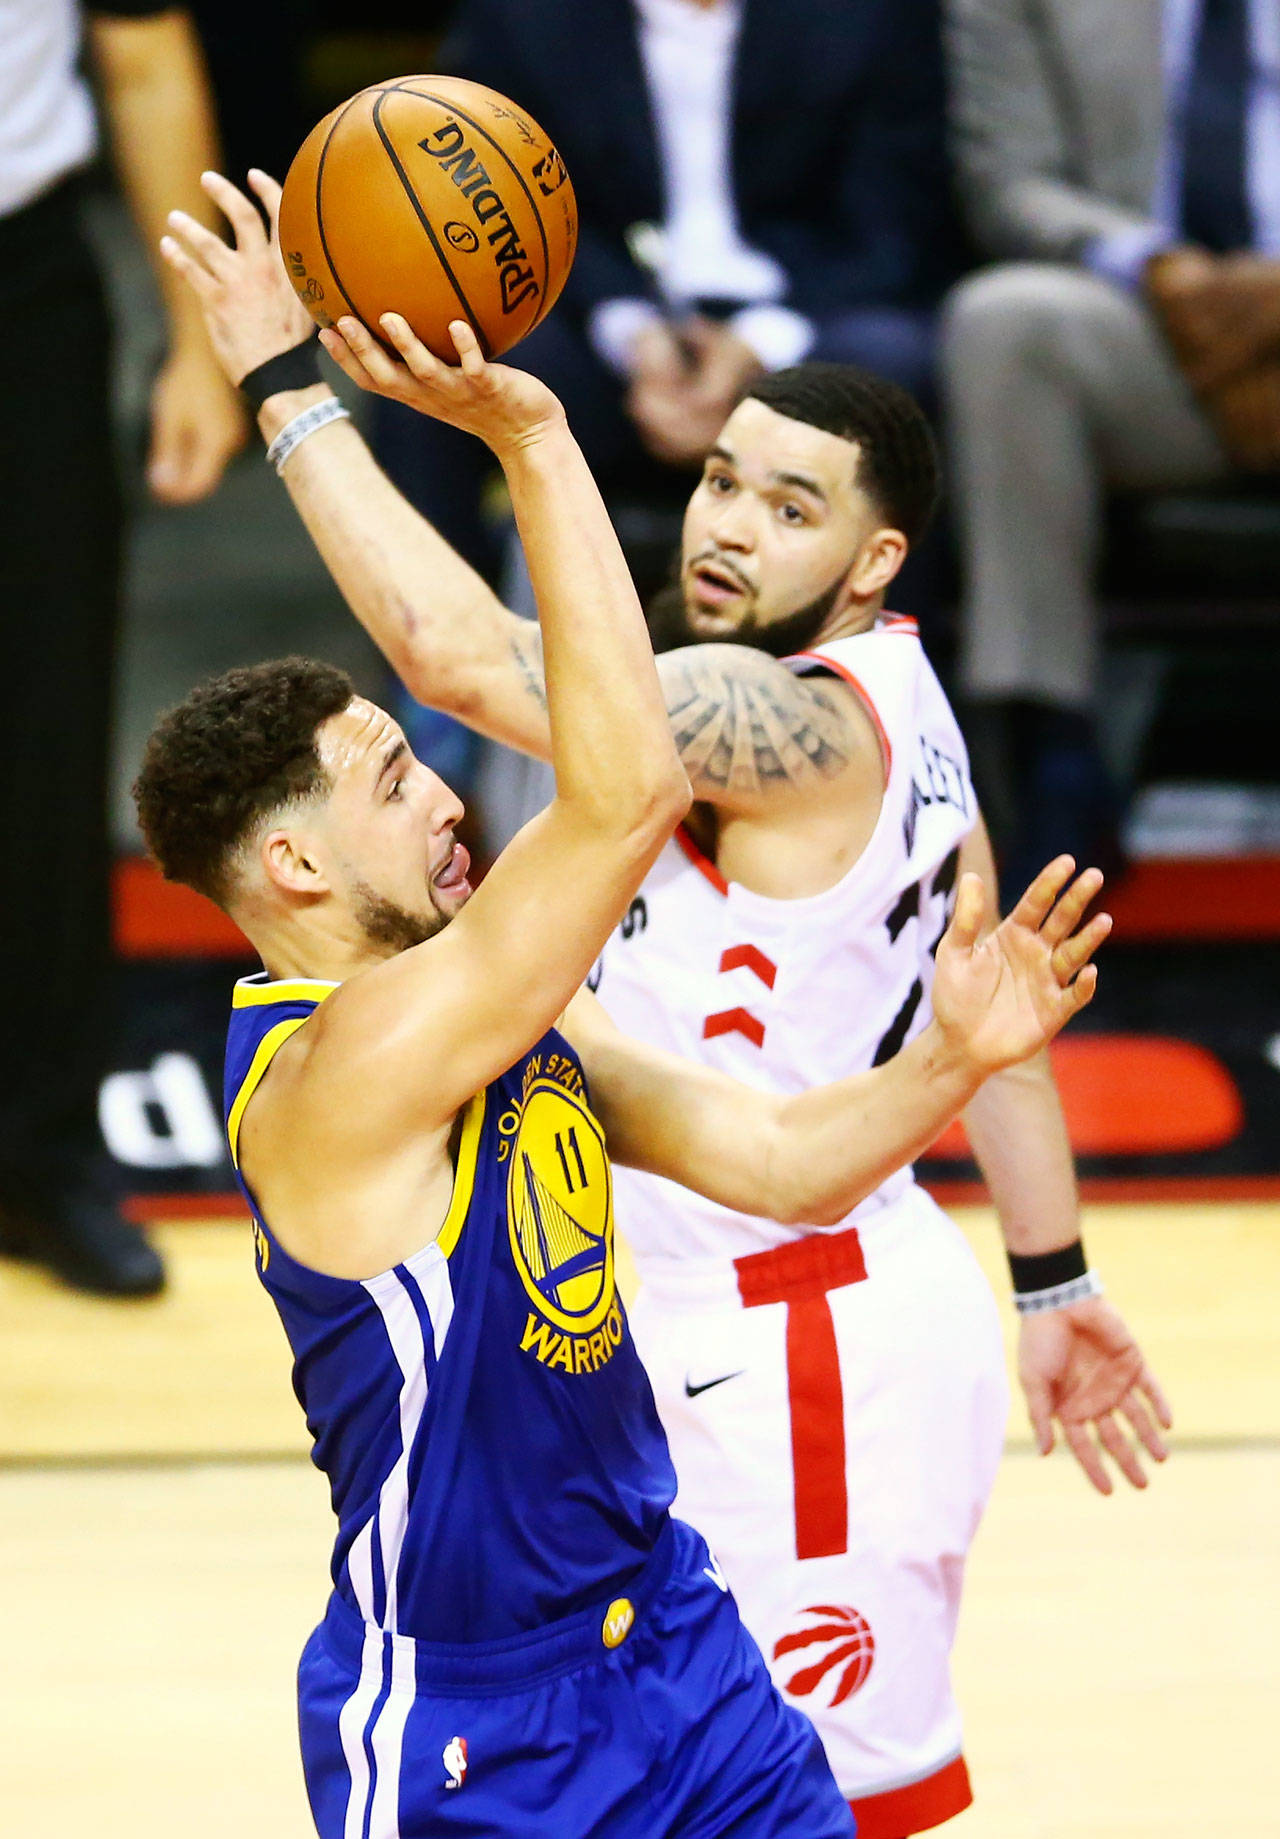 Warriors unable to handle their new Finals foe